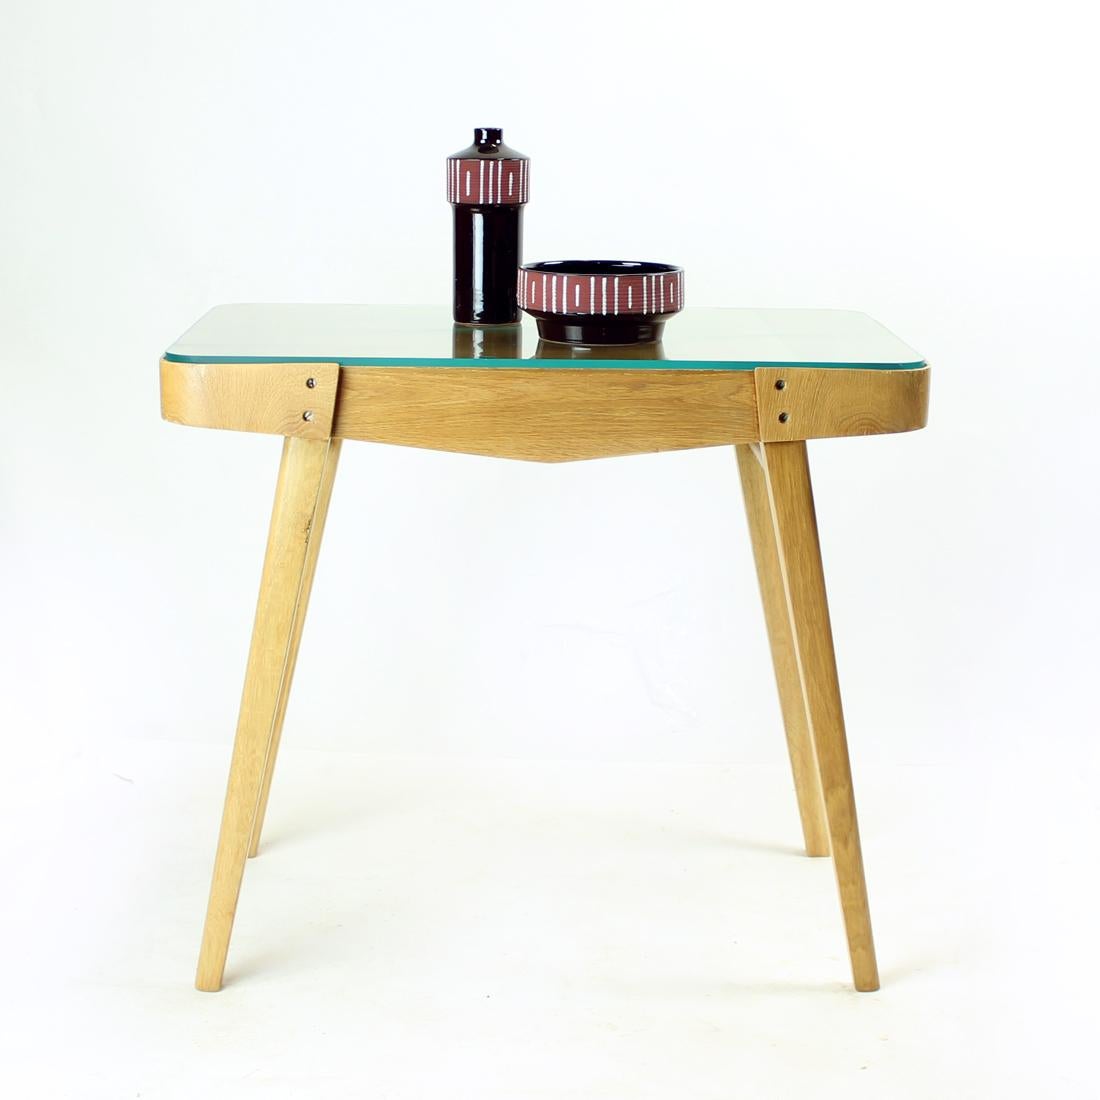 Midcentury Coffee Table in Oak and Glass, Czechoslovakia, 1960s For Sale 8